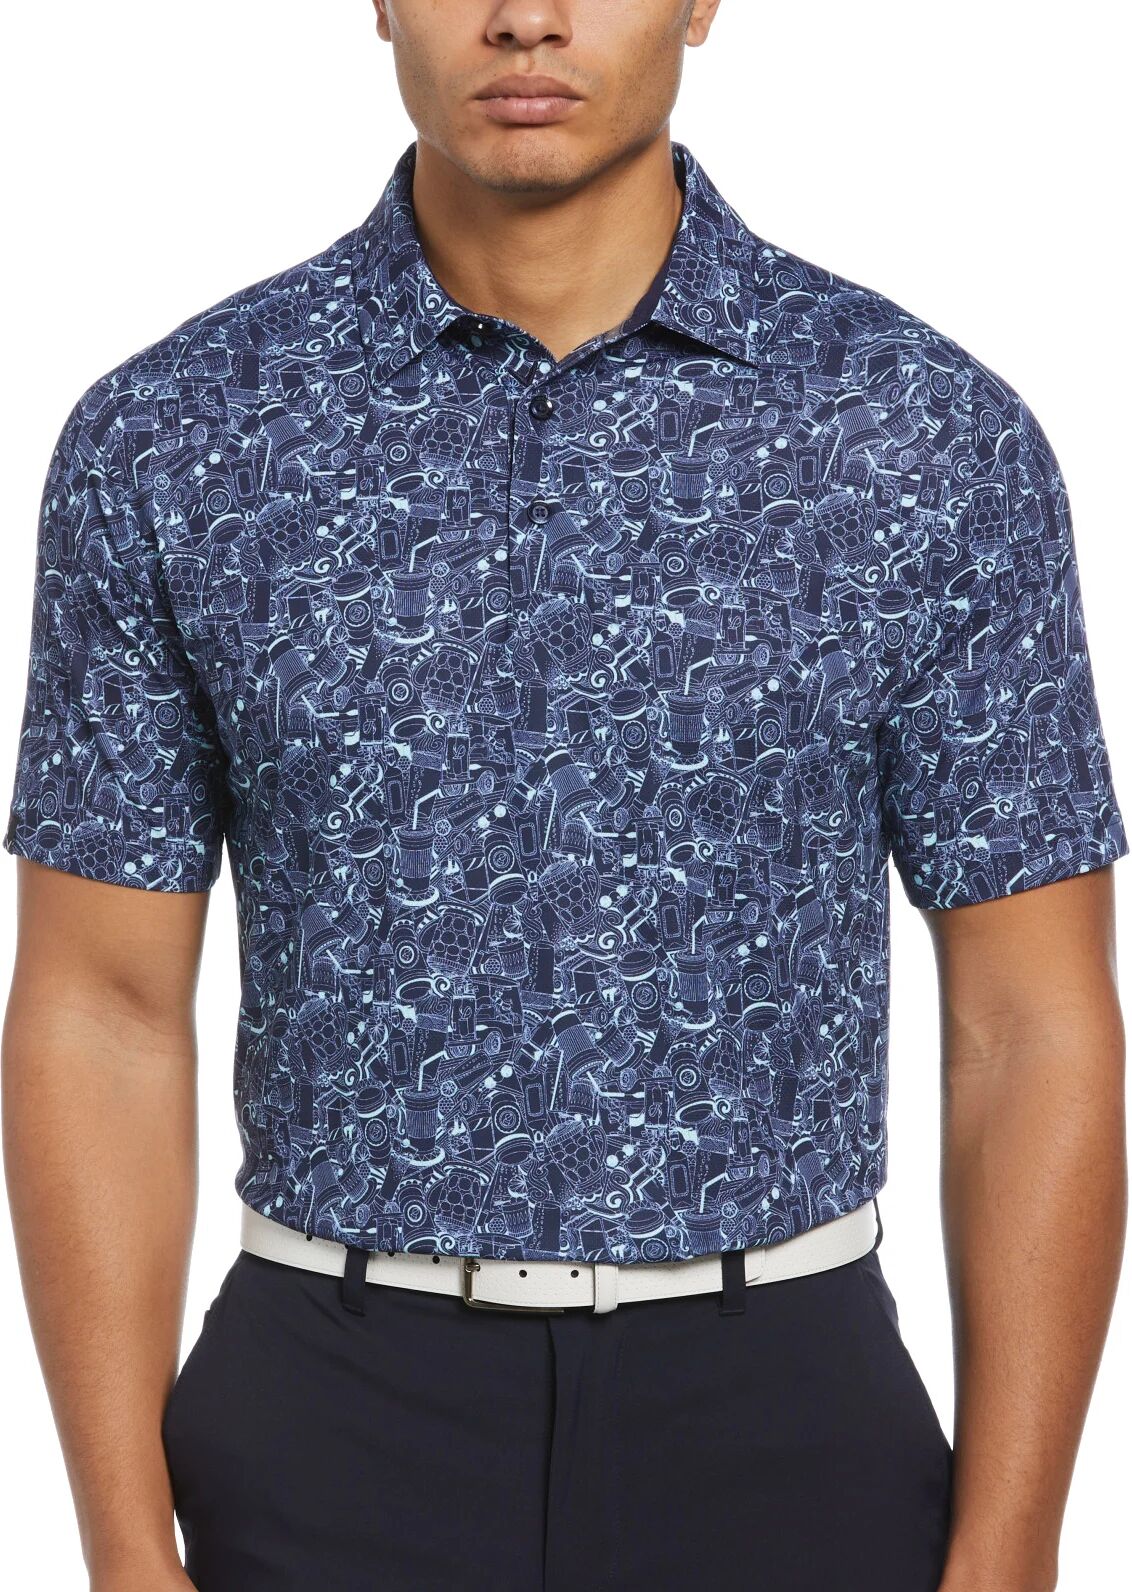 Callaway Essential Drink Print Men's Golf Polo - Blue, Size: X-Large